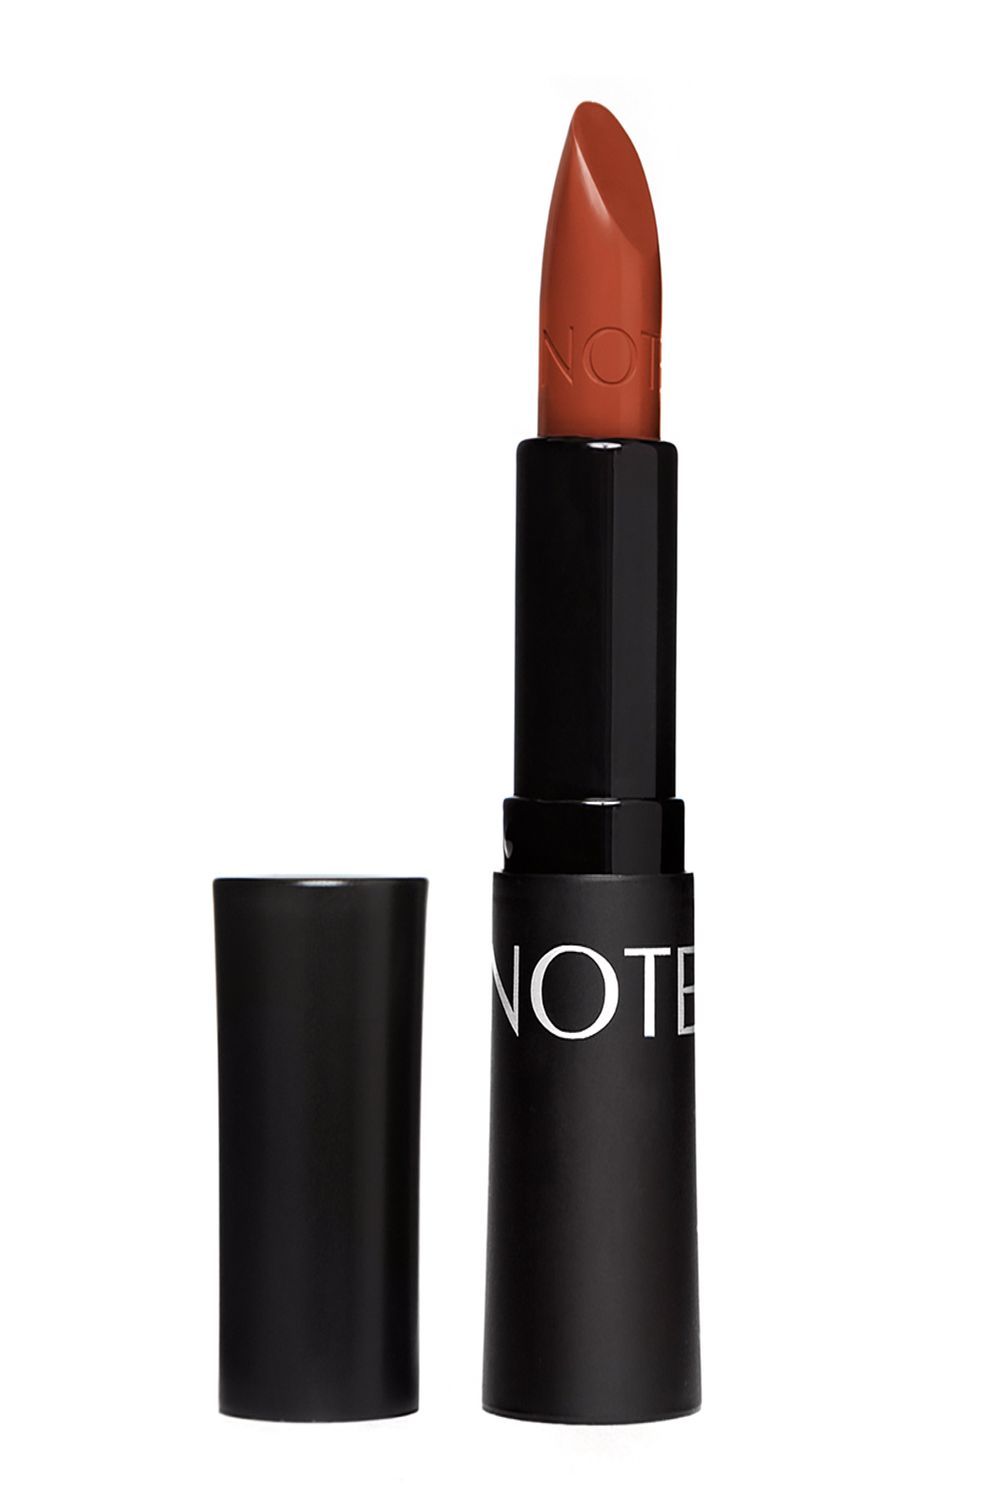 Buy NOTE ULTRA RICH COLOR LIPSTICK 07(Hot Red) - Purplle